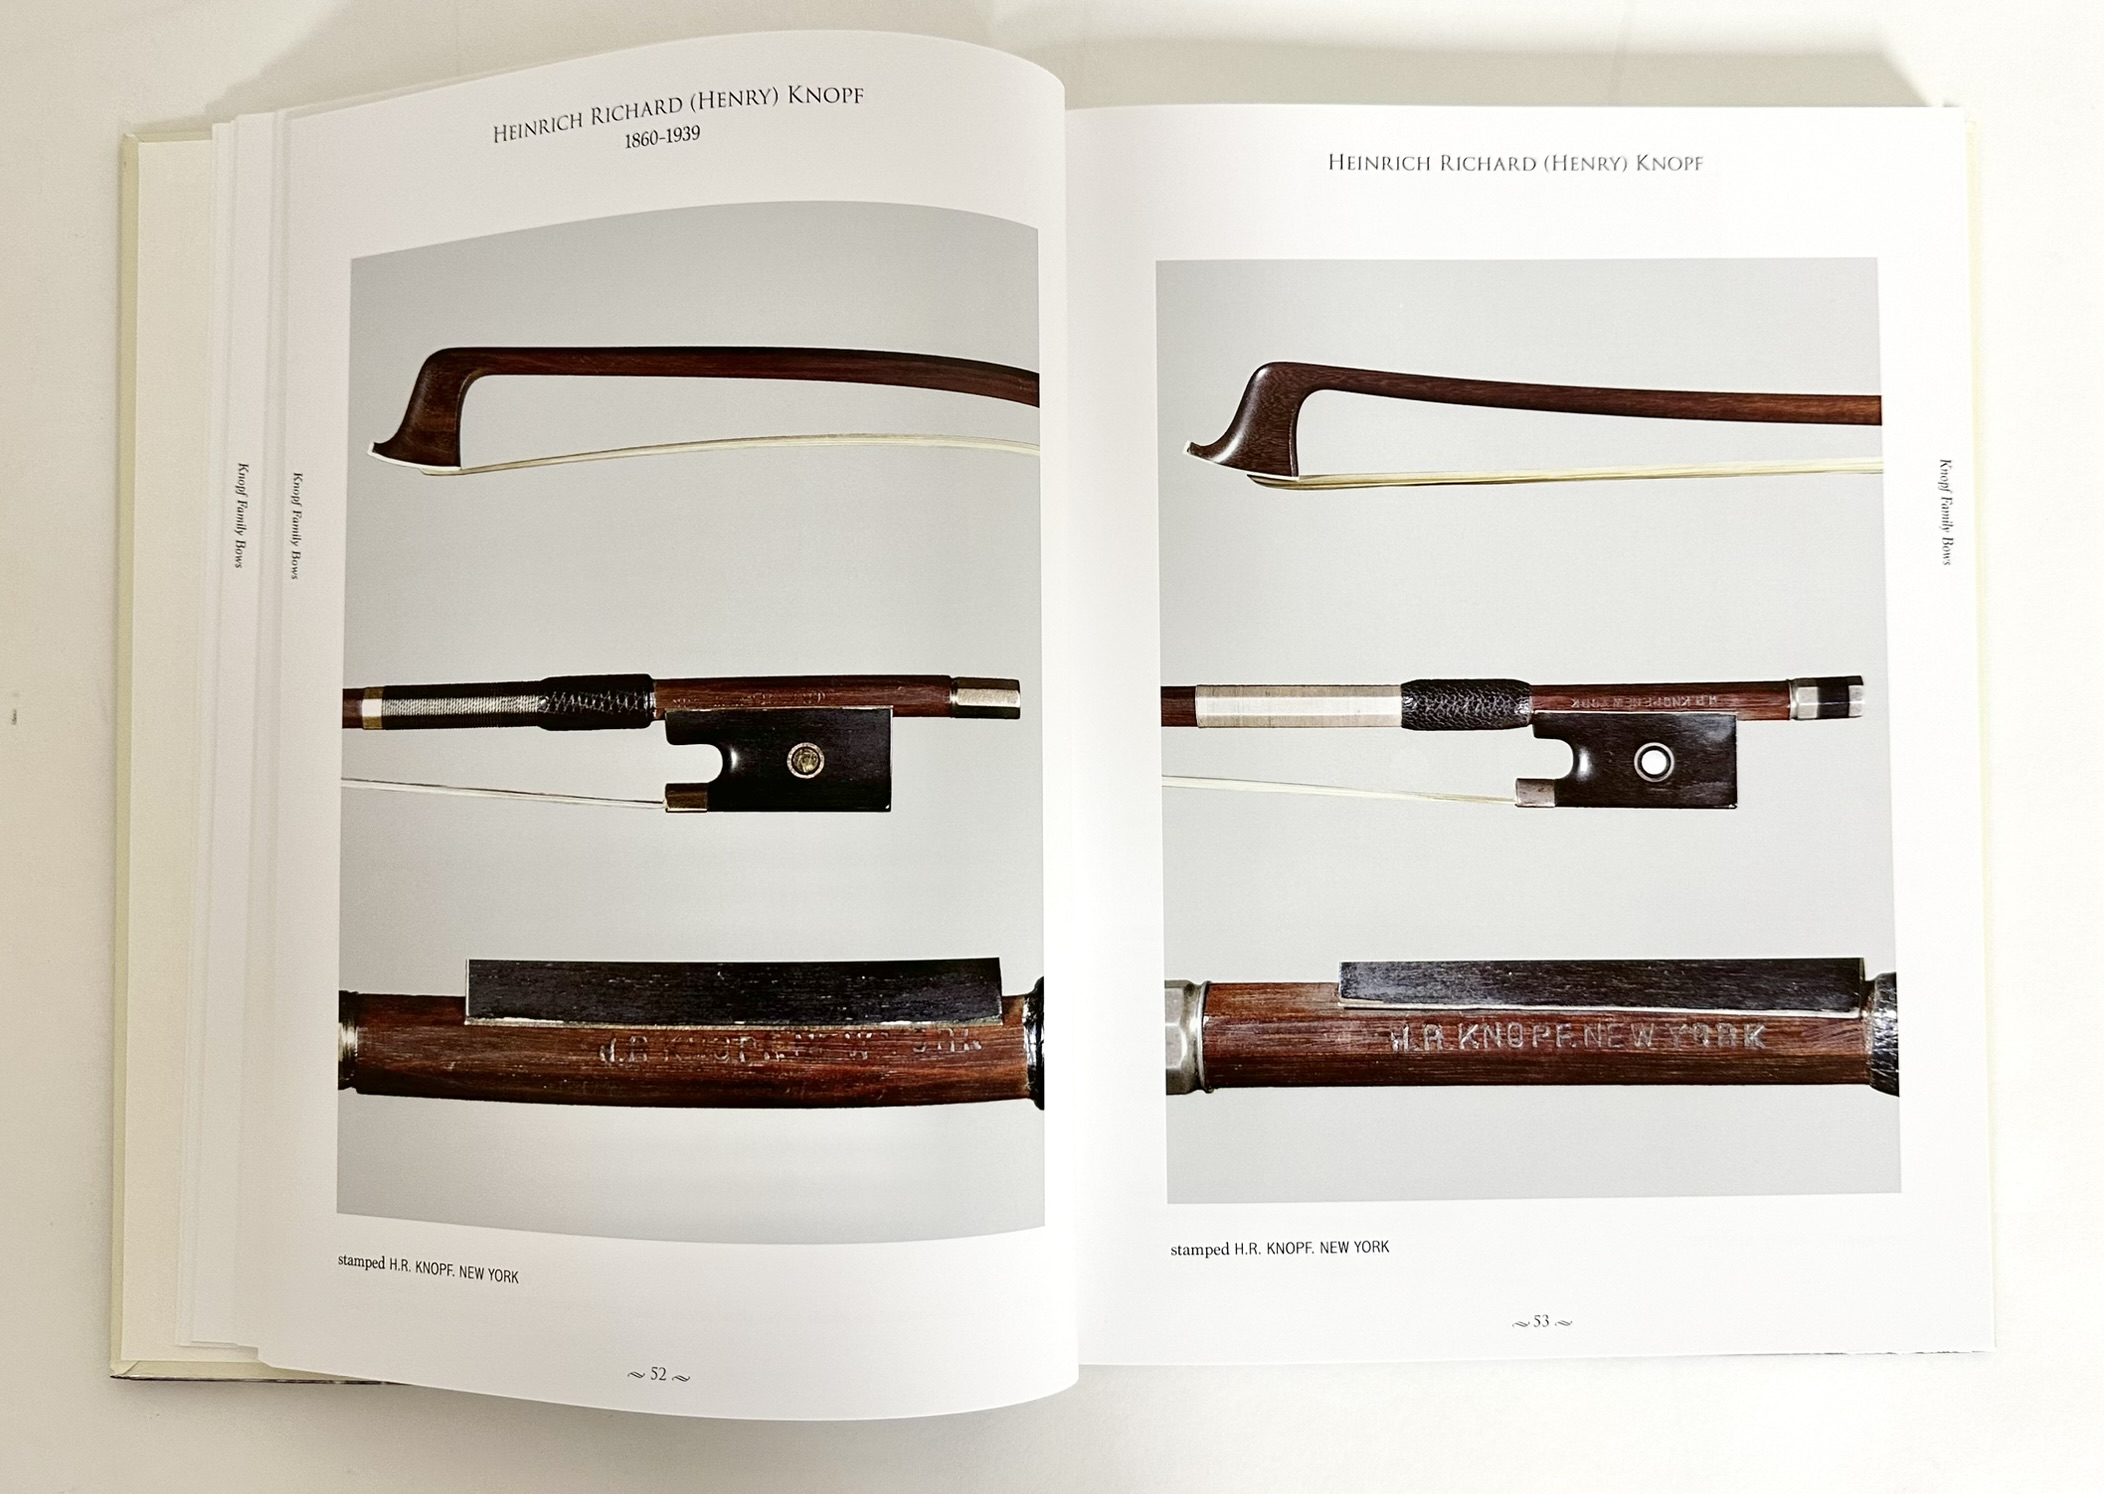 The German Bow - A Study Exhibit of German Bow Making